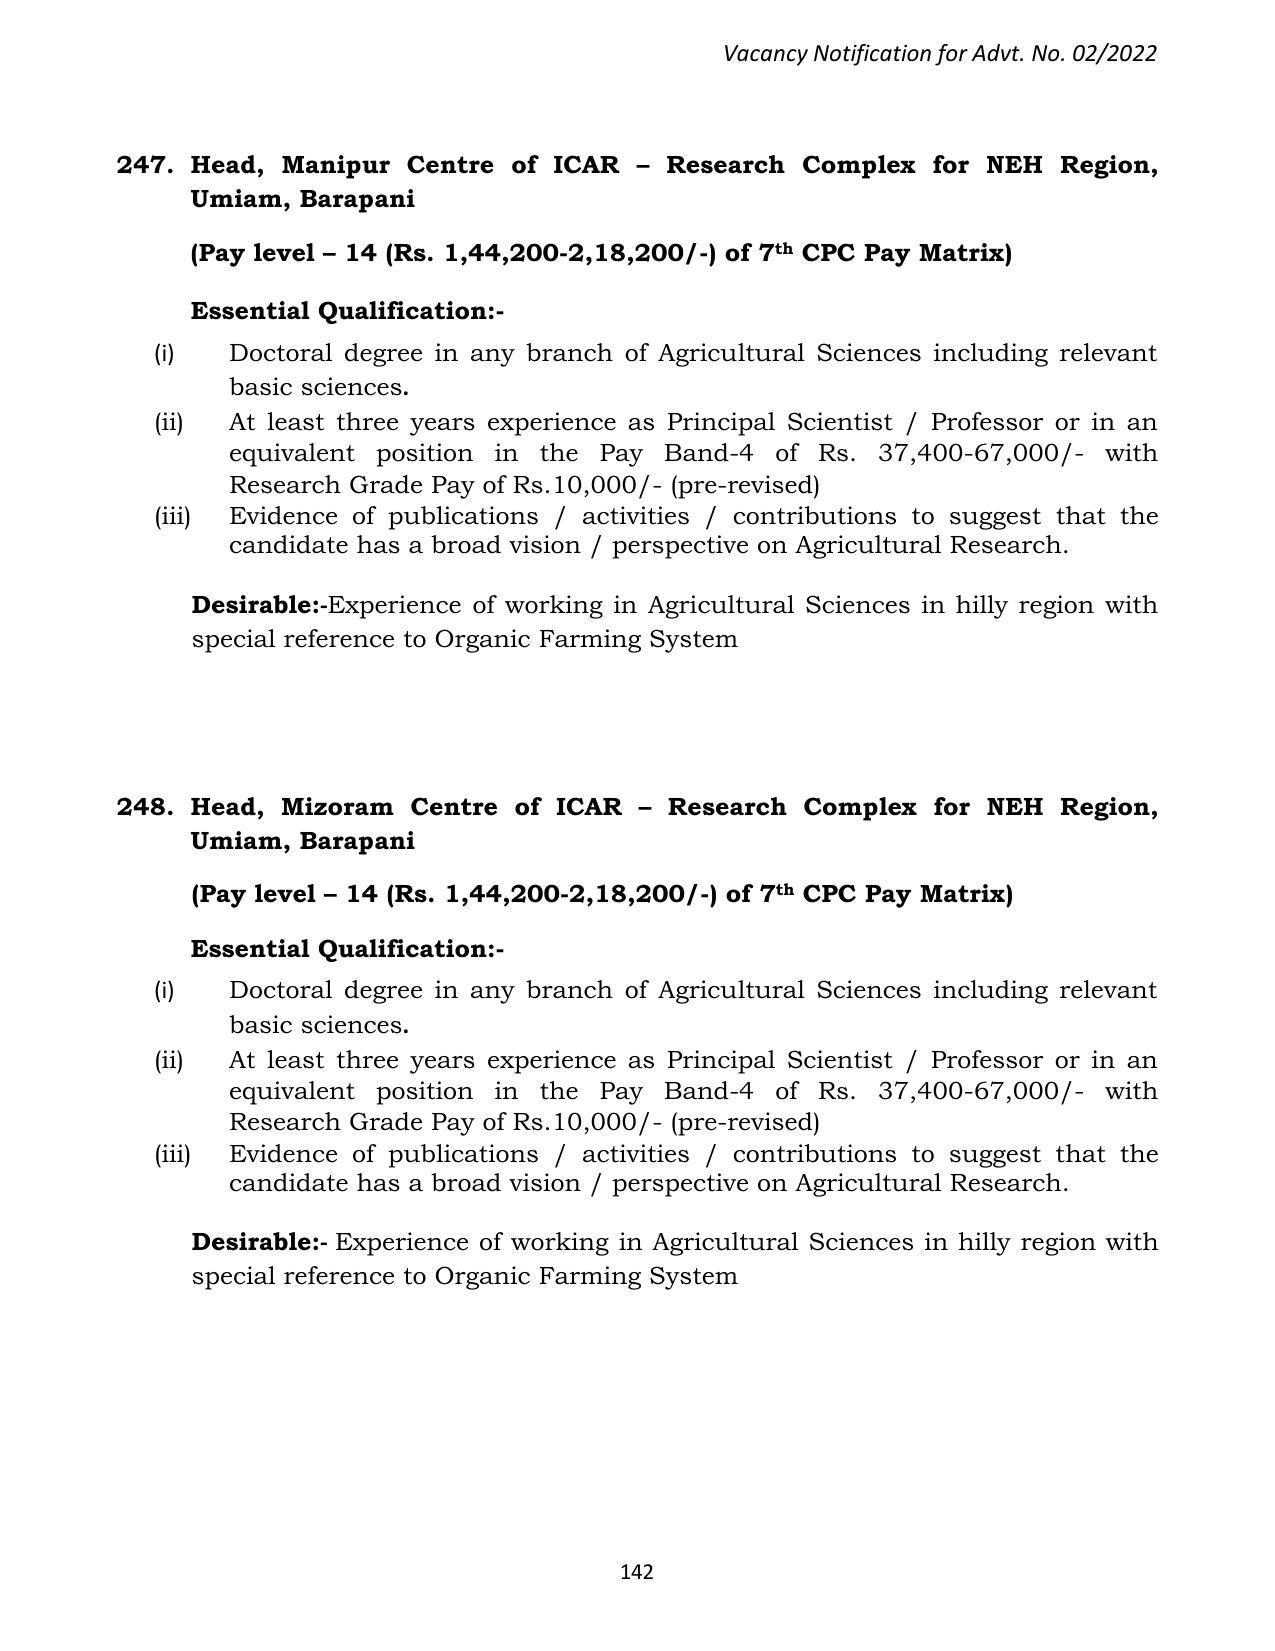 ASRB Non-Research Management Recruitment 2022 - Page 179